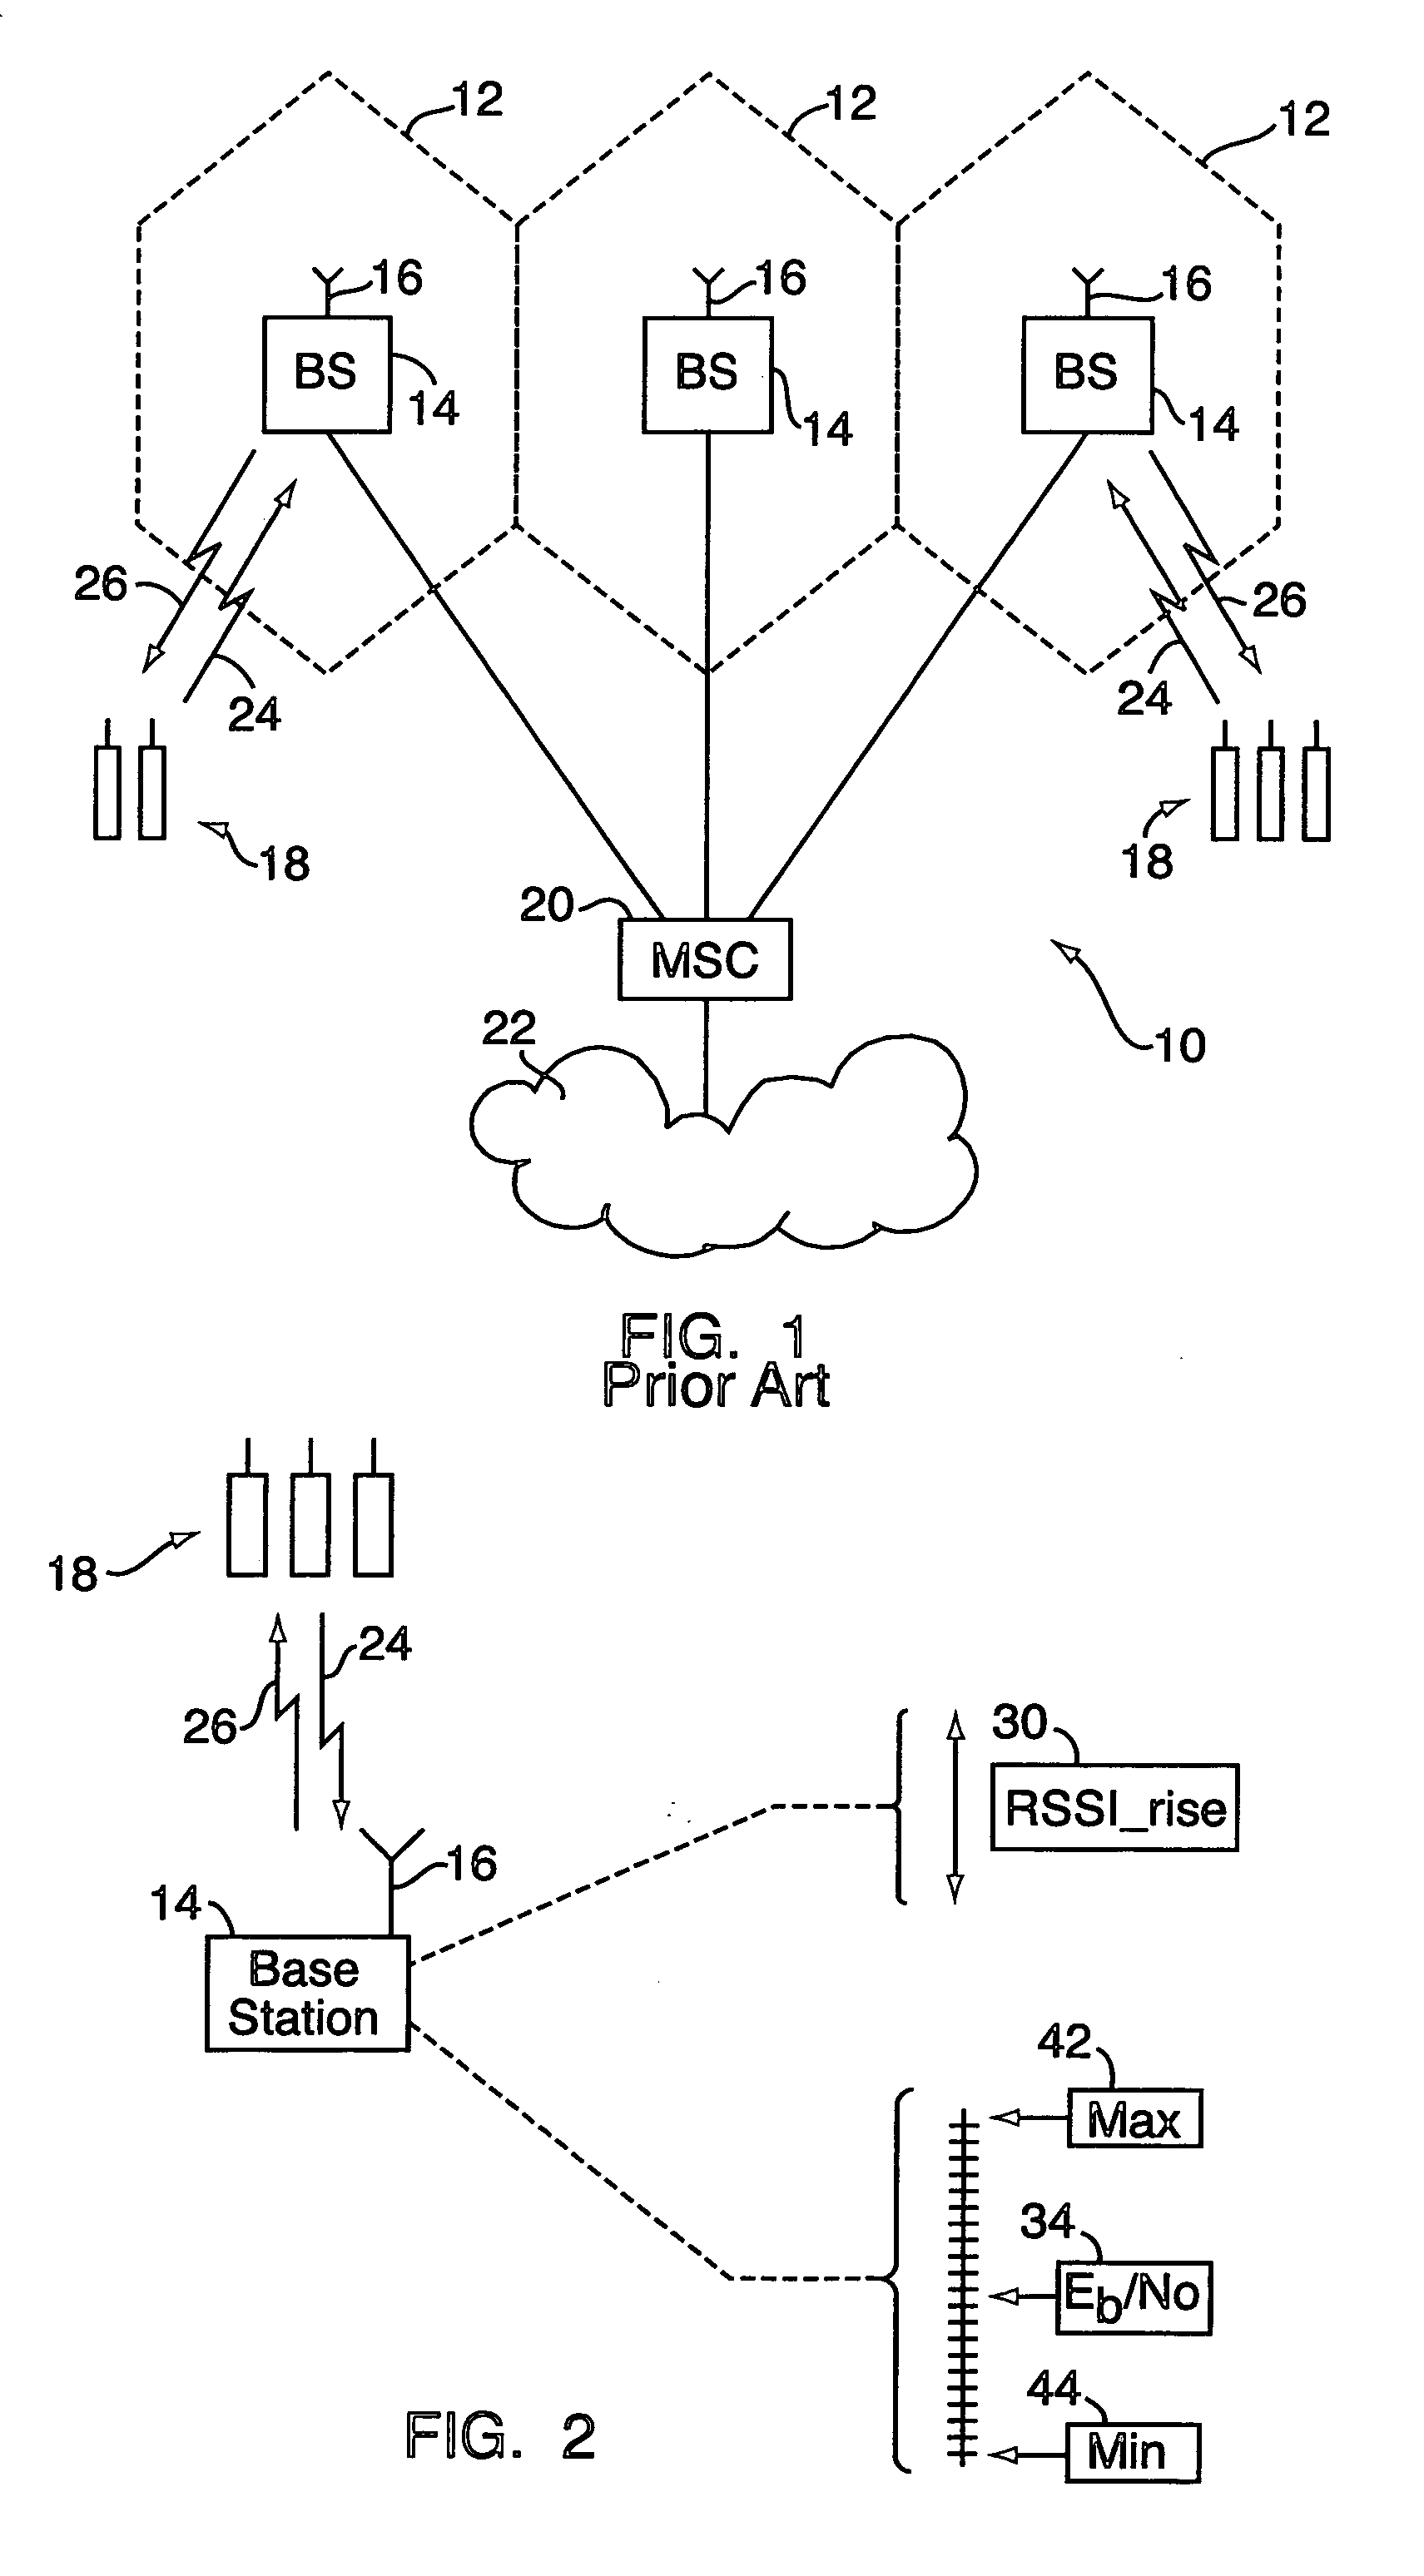 Method for extracting optimal reverse link capacity by scaling reverse link Eb/No setpoint based on aggregate channel load and condition